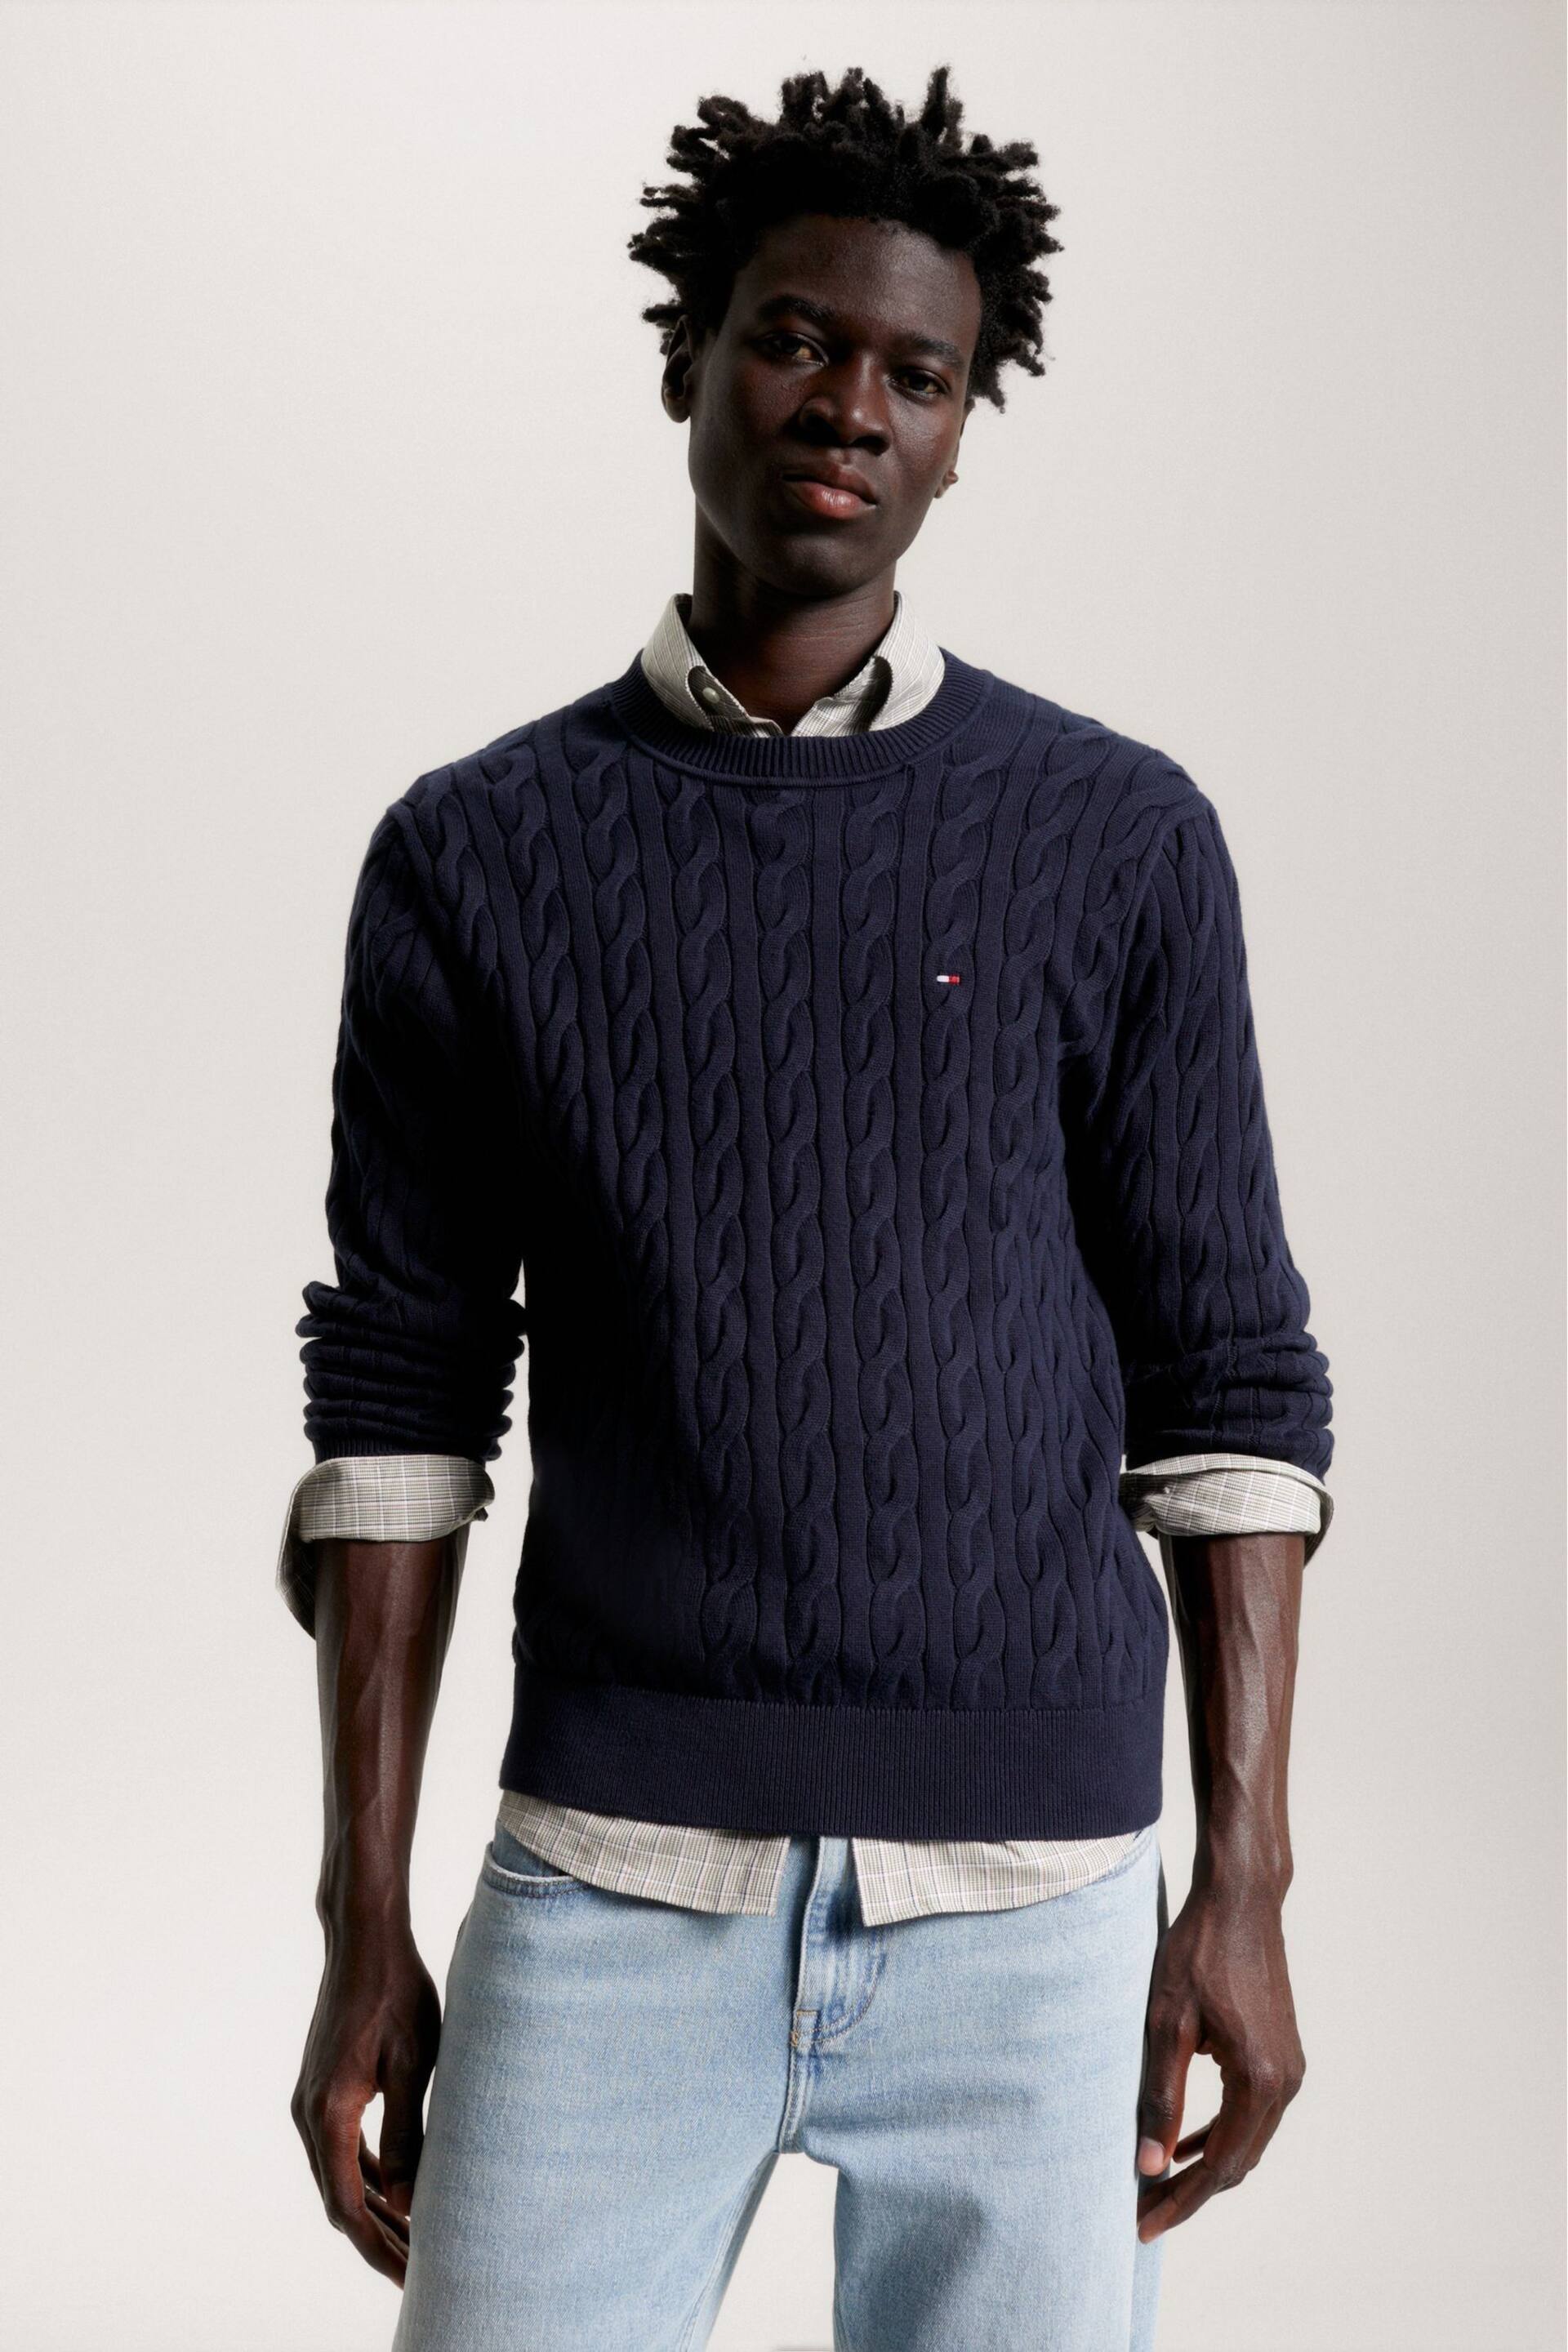 Tommy Hilfiger Blue Classic Cable Sweater - Image 1 of 5